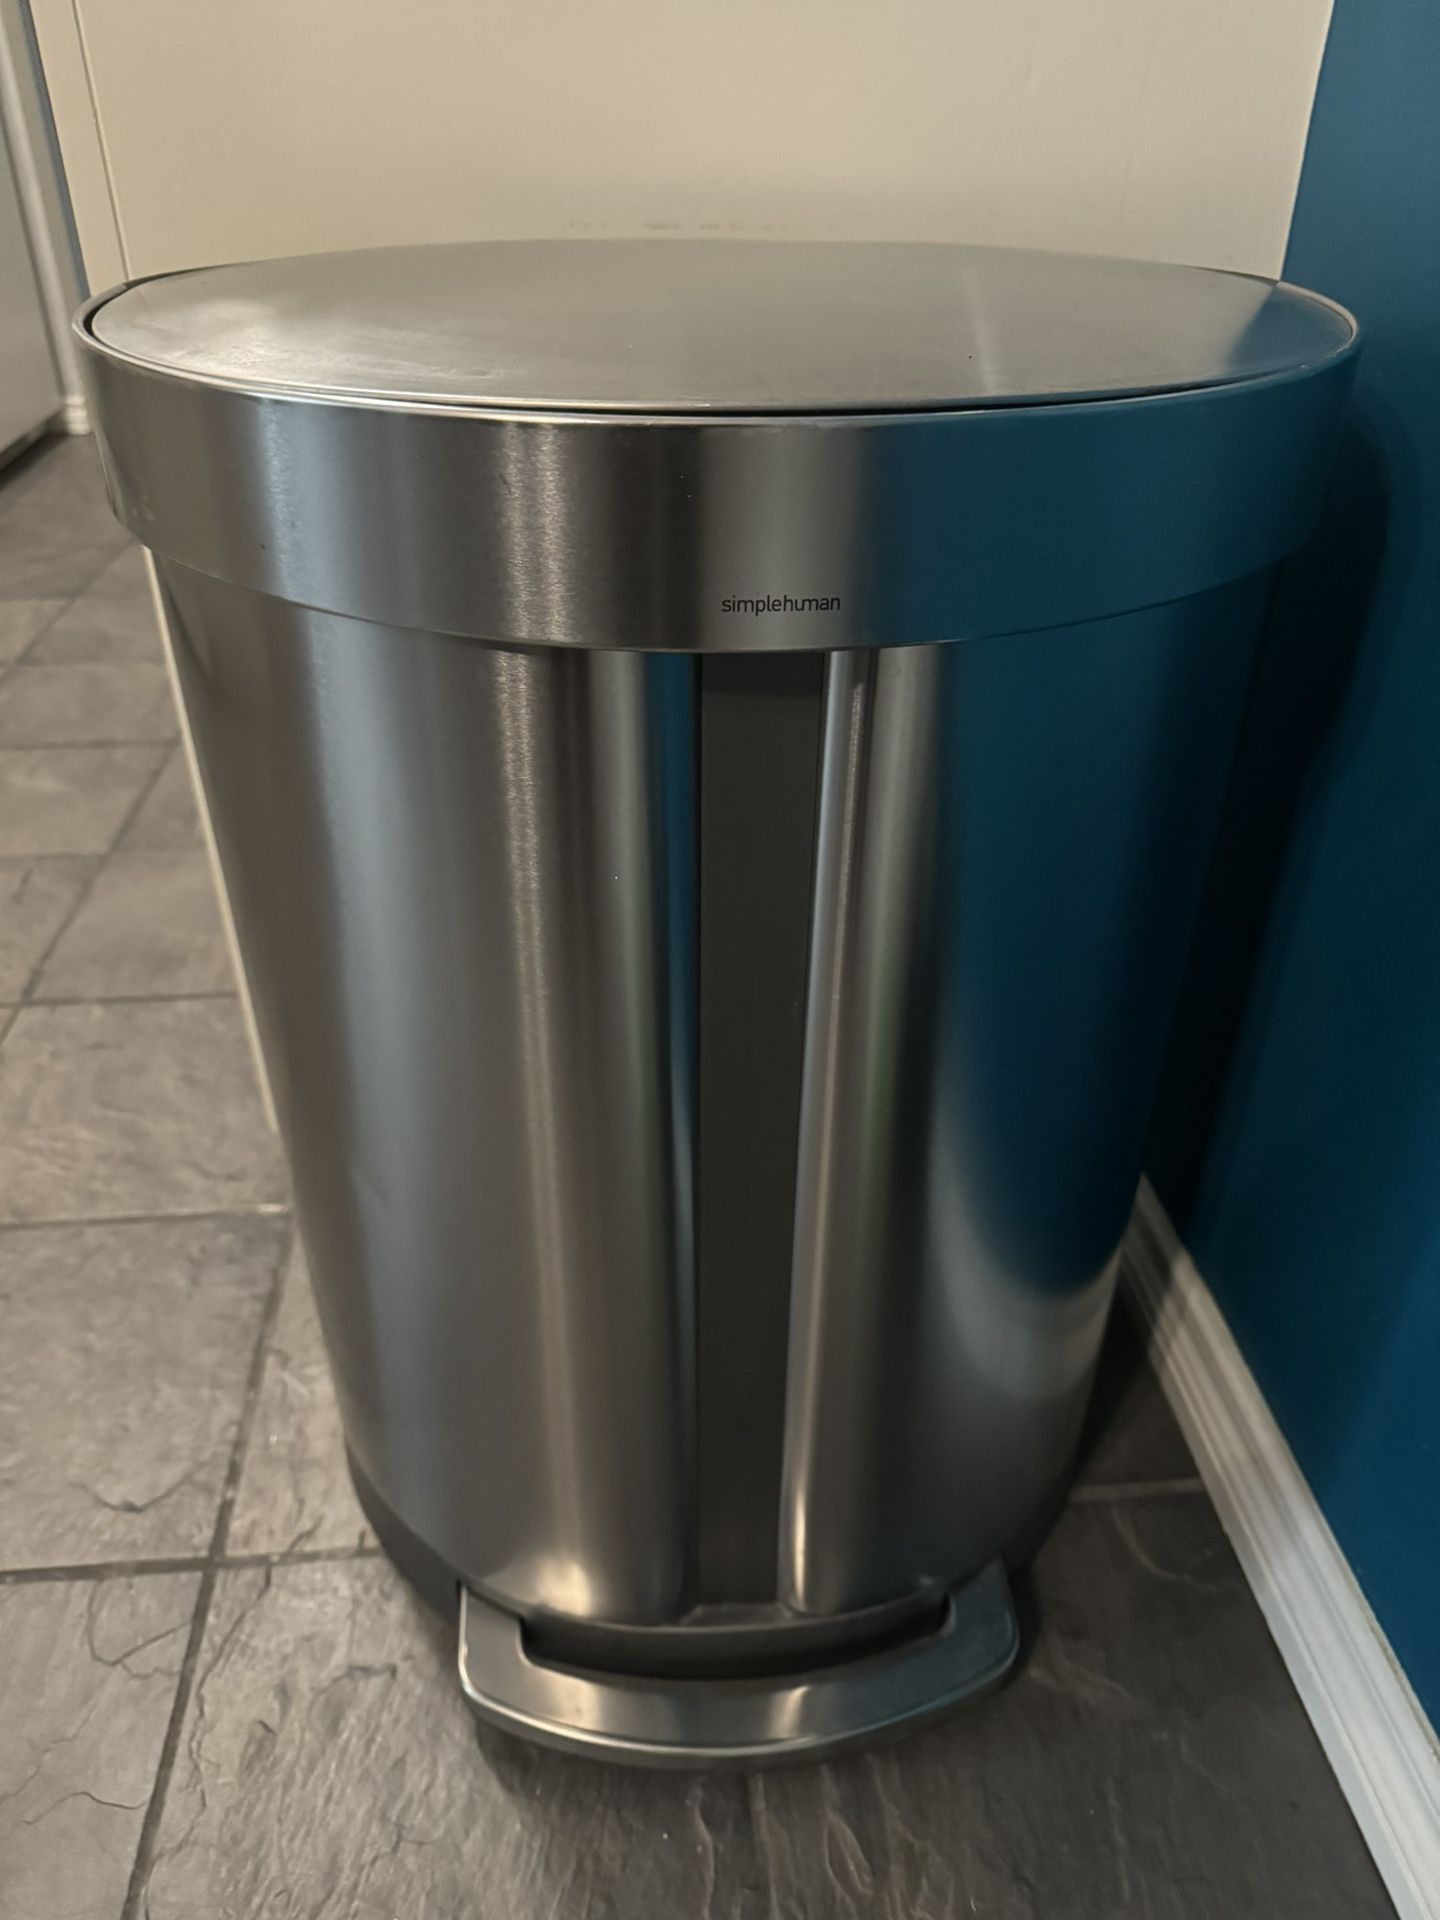 SimpleHuman Stainless Steel Trash Can